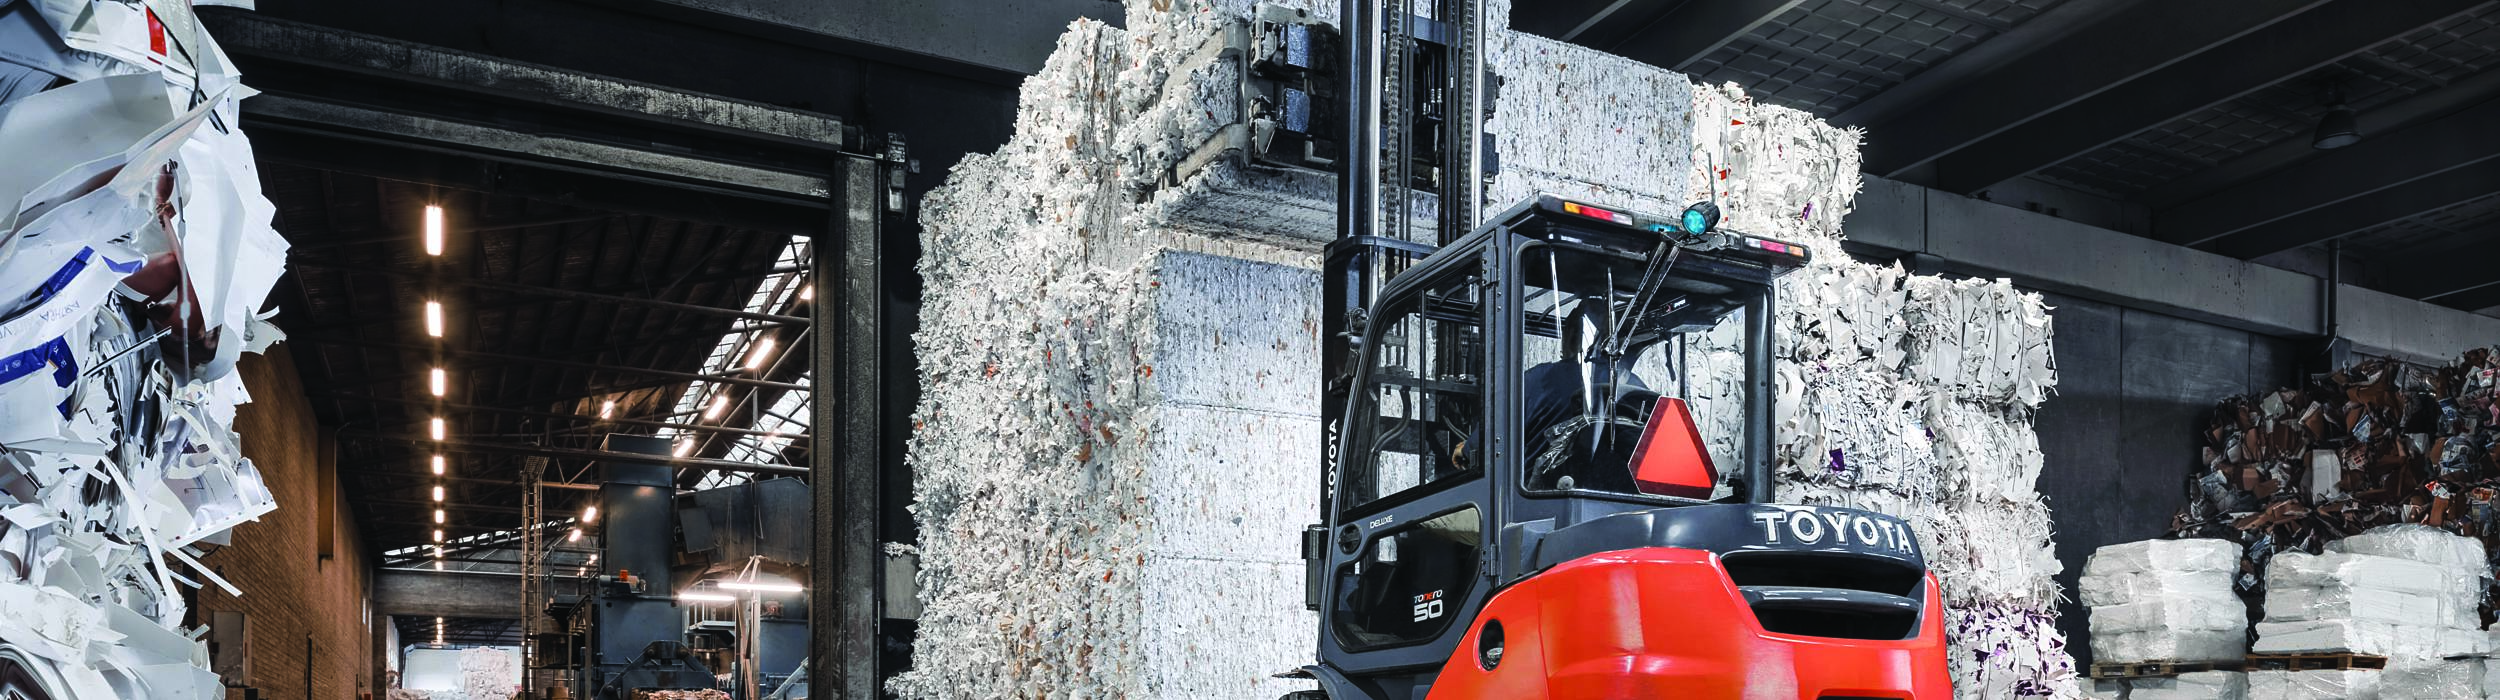 Toyota Tonero counterbalance used in recycling warehouse